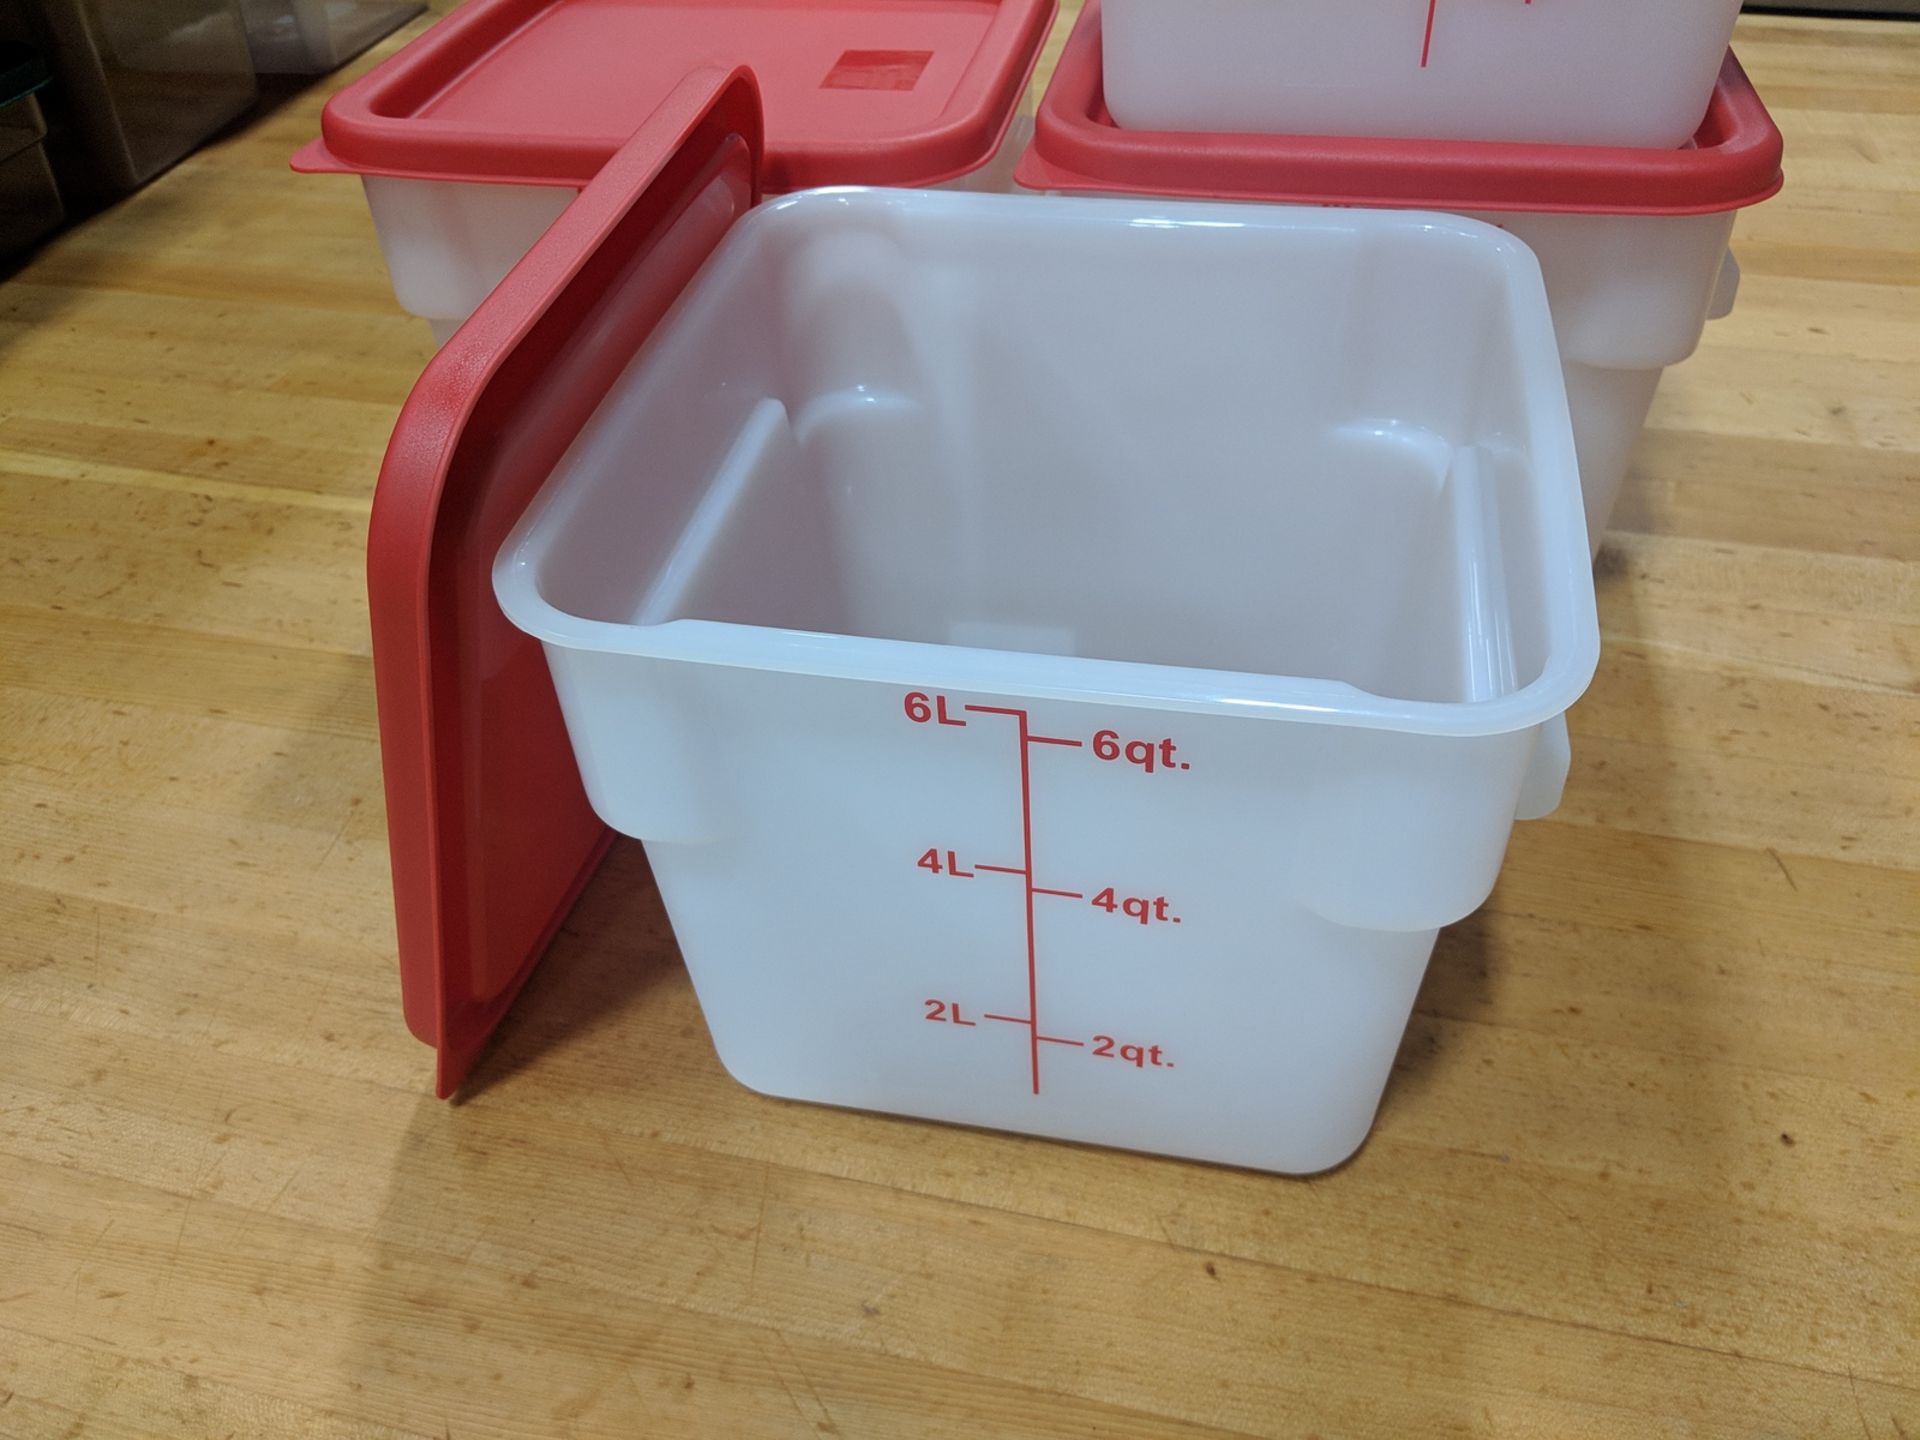 6qt White Food Storage Containers with Lids - Lot of 4